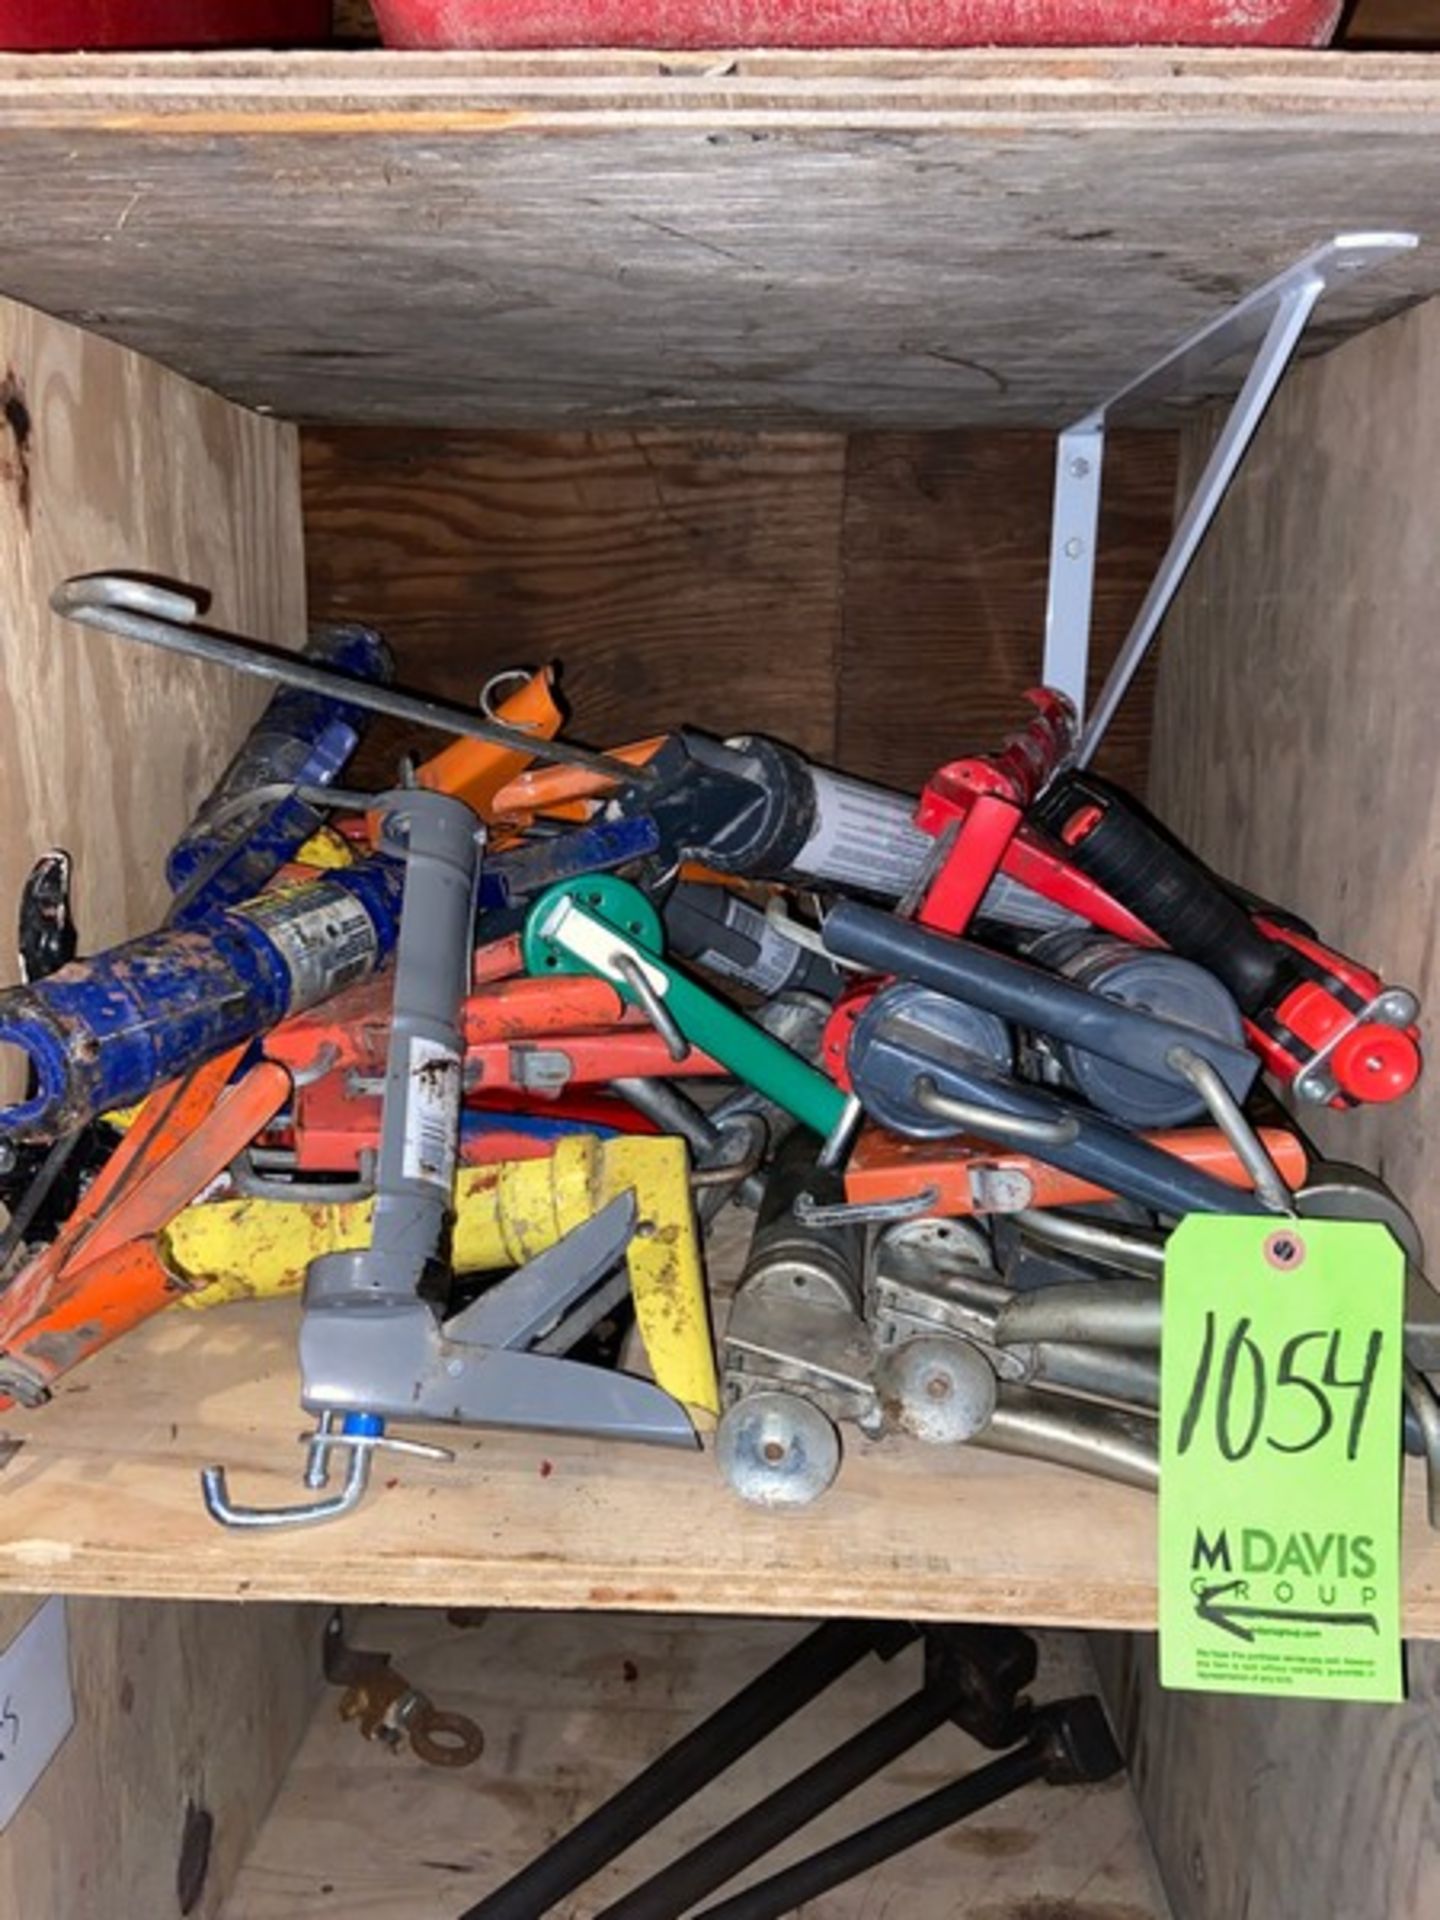 Lot with Concrete Tools & Cocking Guns (LOCATED IN MONROEVILLE, PA)